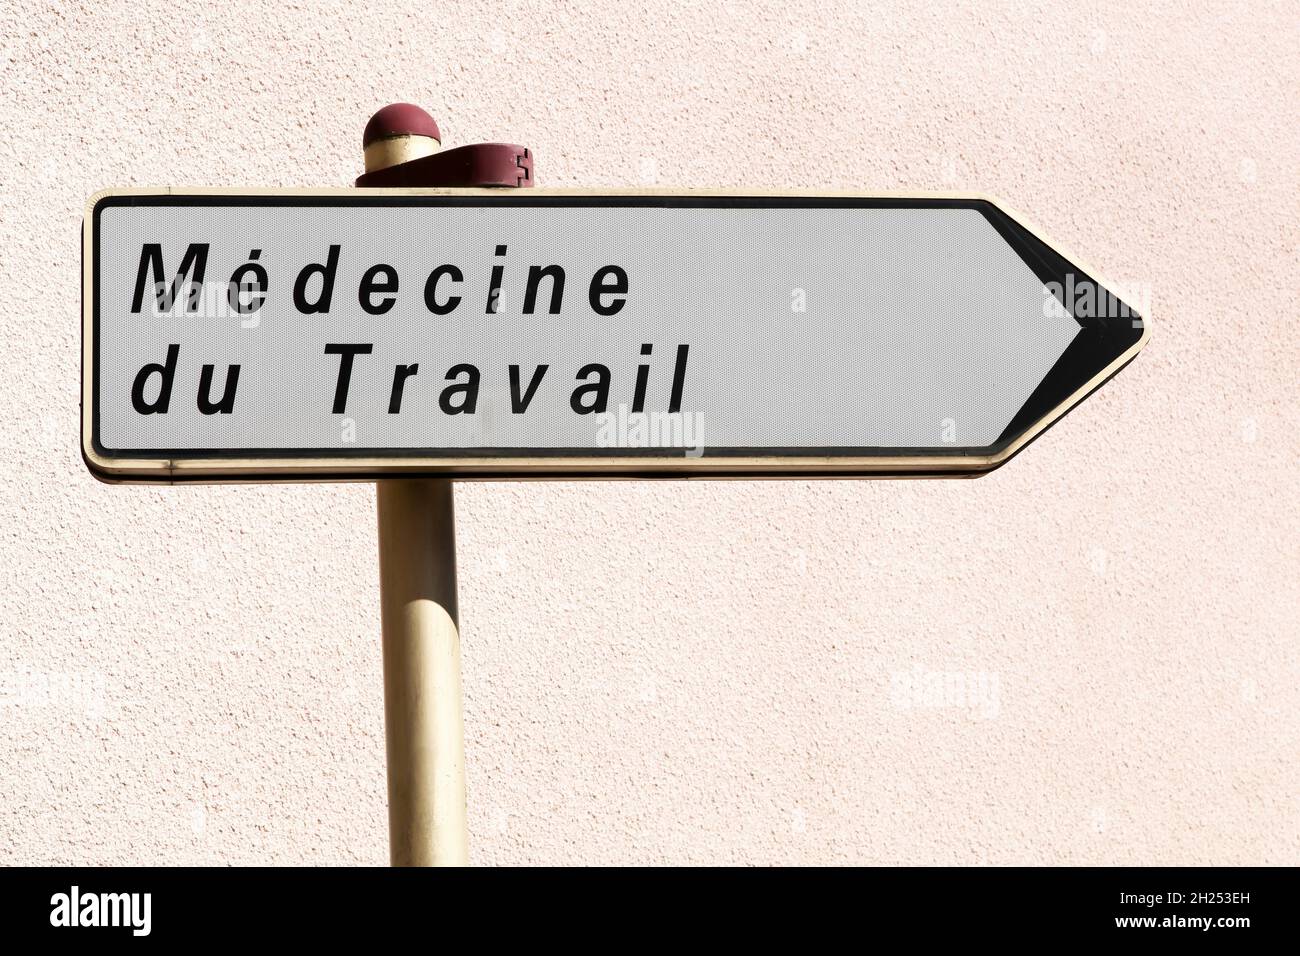 Occupational medicine road sign called medecine du travail in french language Stock Photo